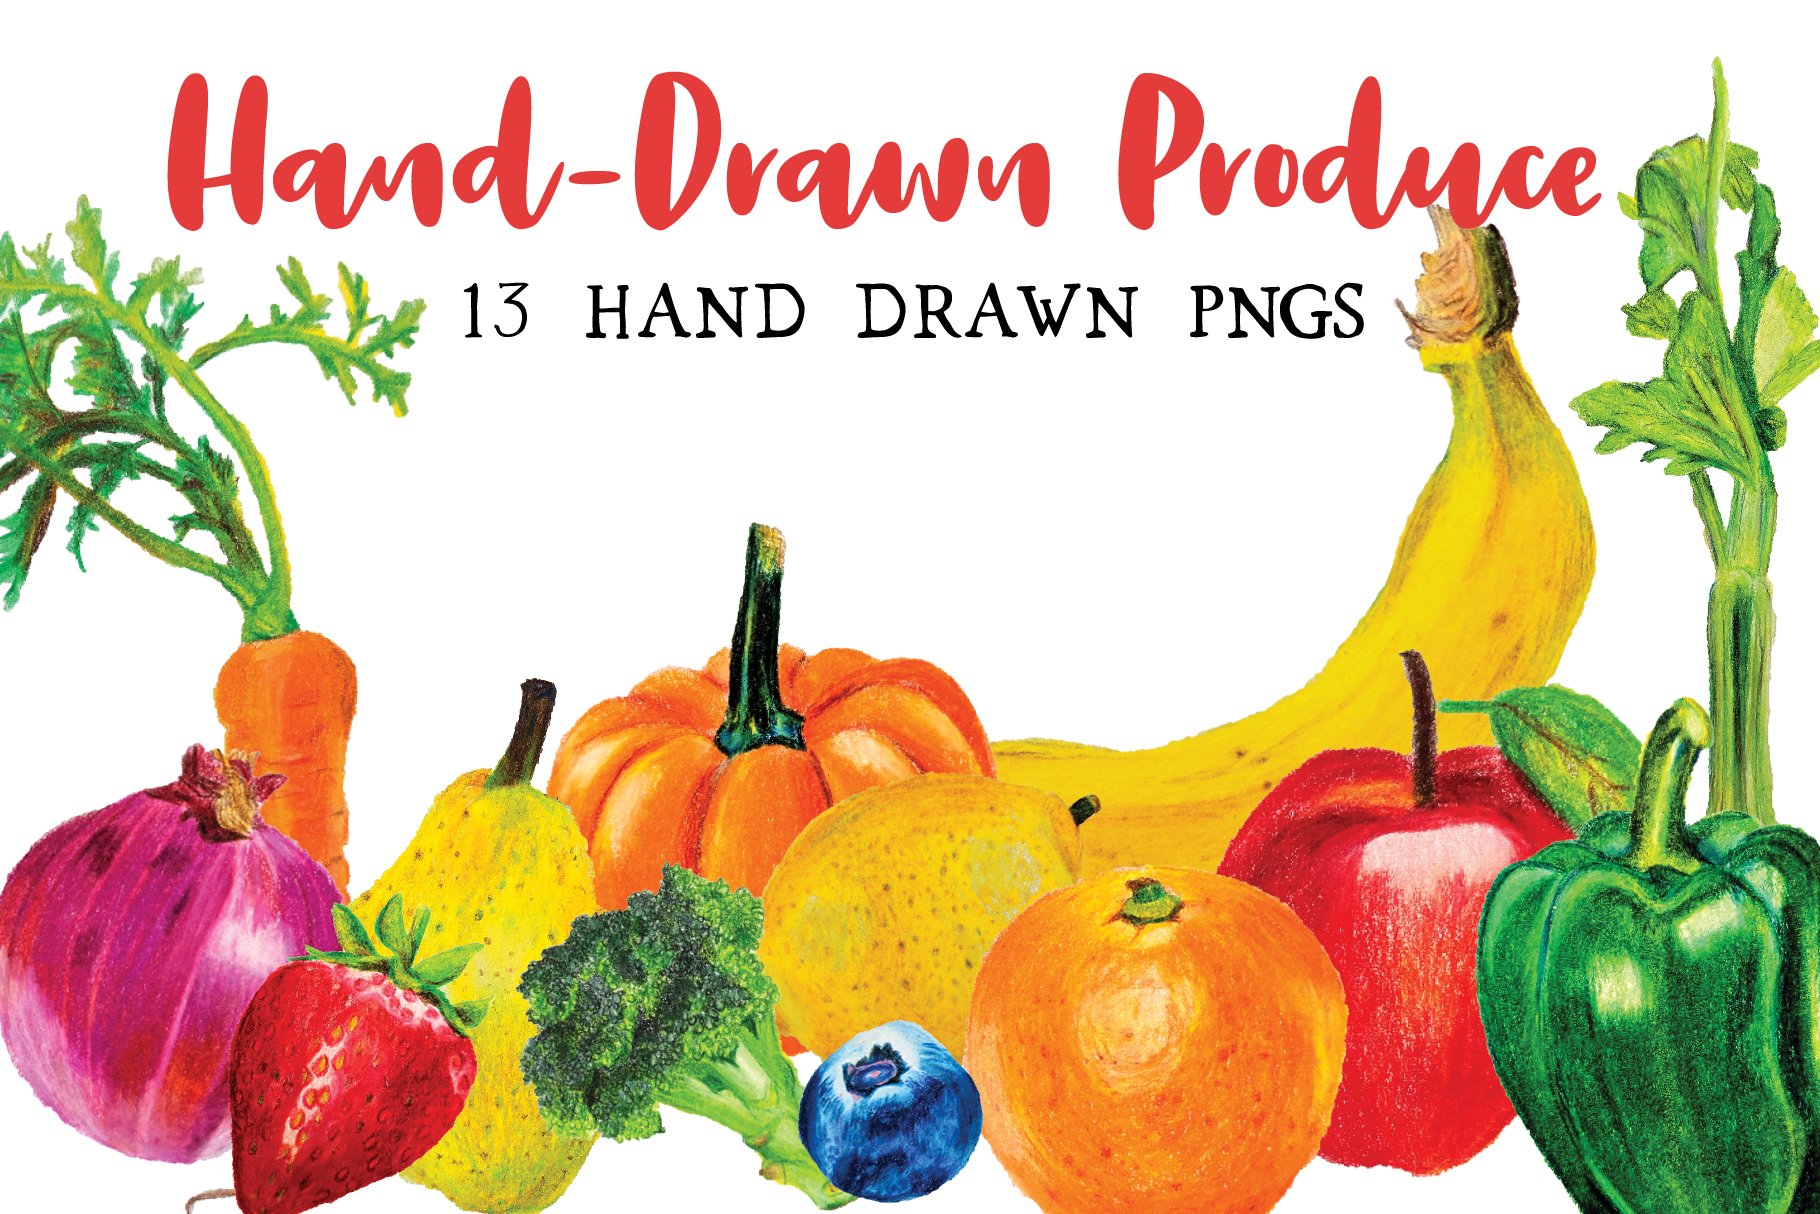 Hand-Drawn Produce cover image.